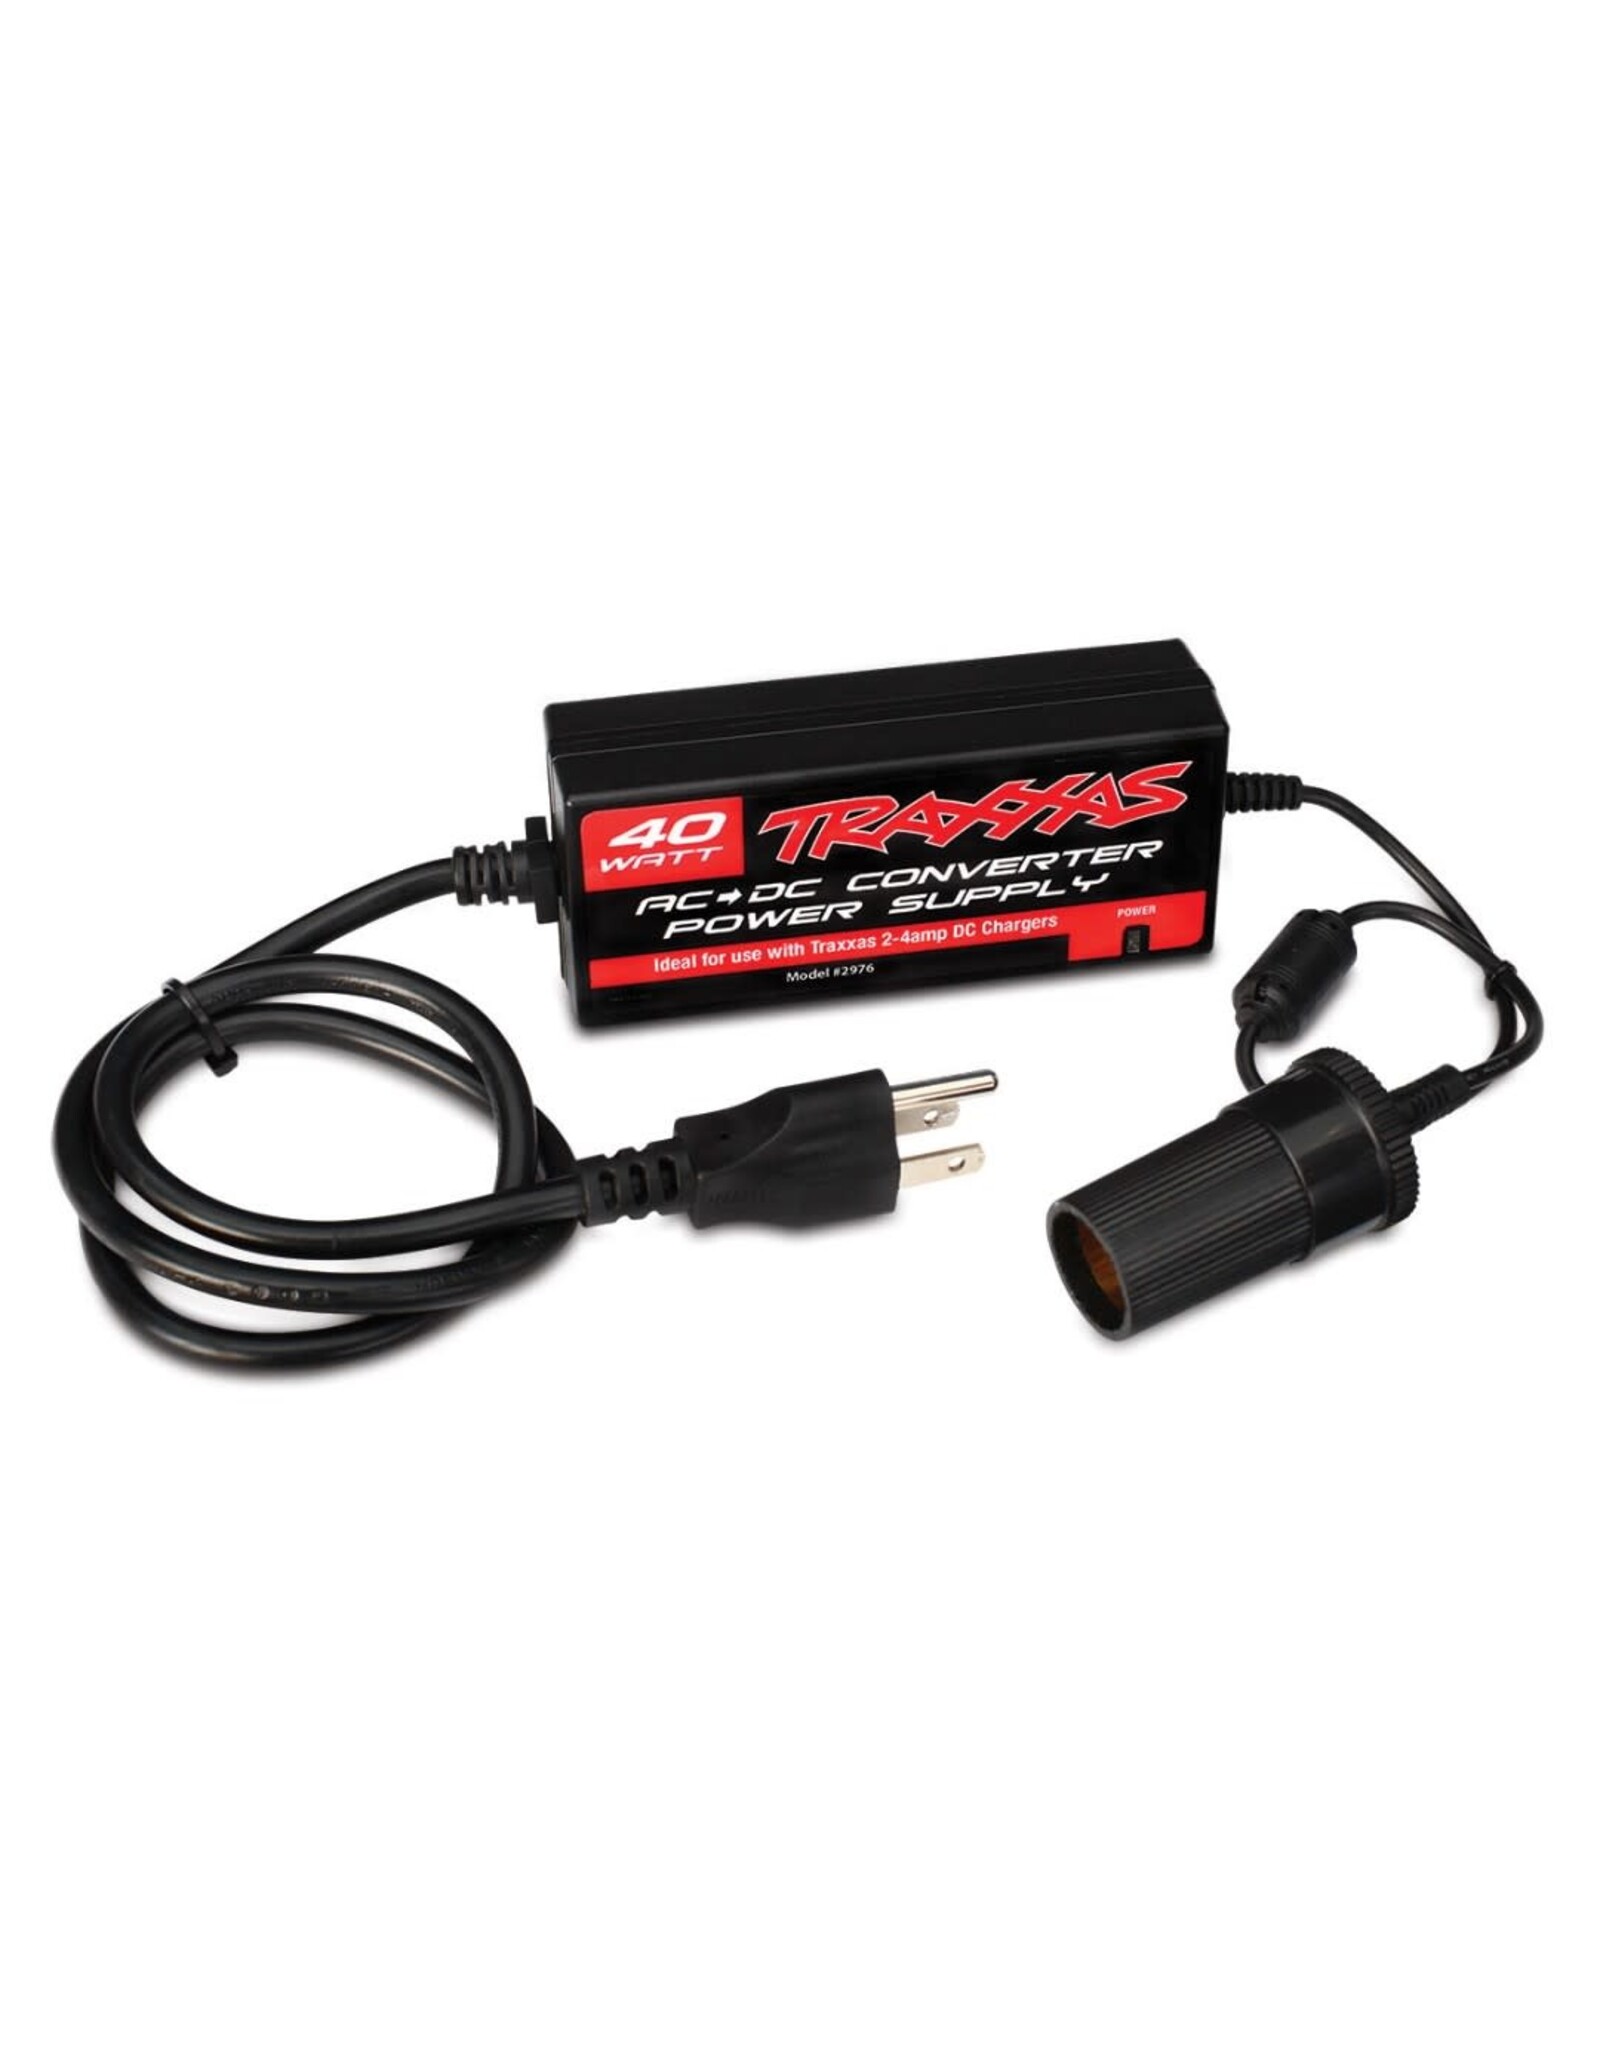 Traxxas Traxxas AC to DC Power Supply Adapter